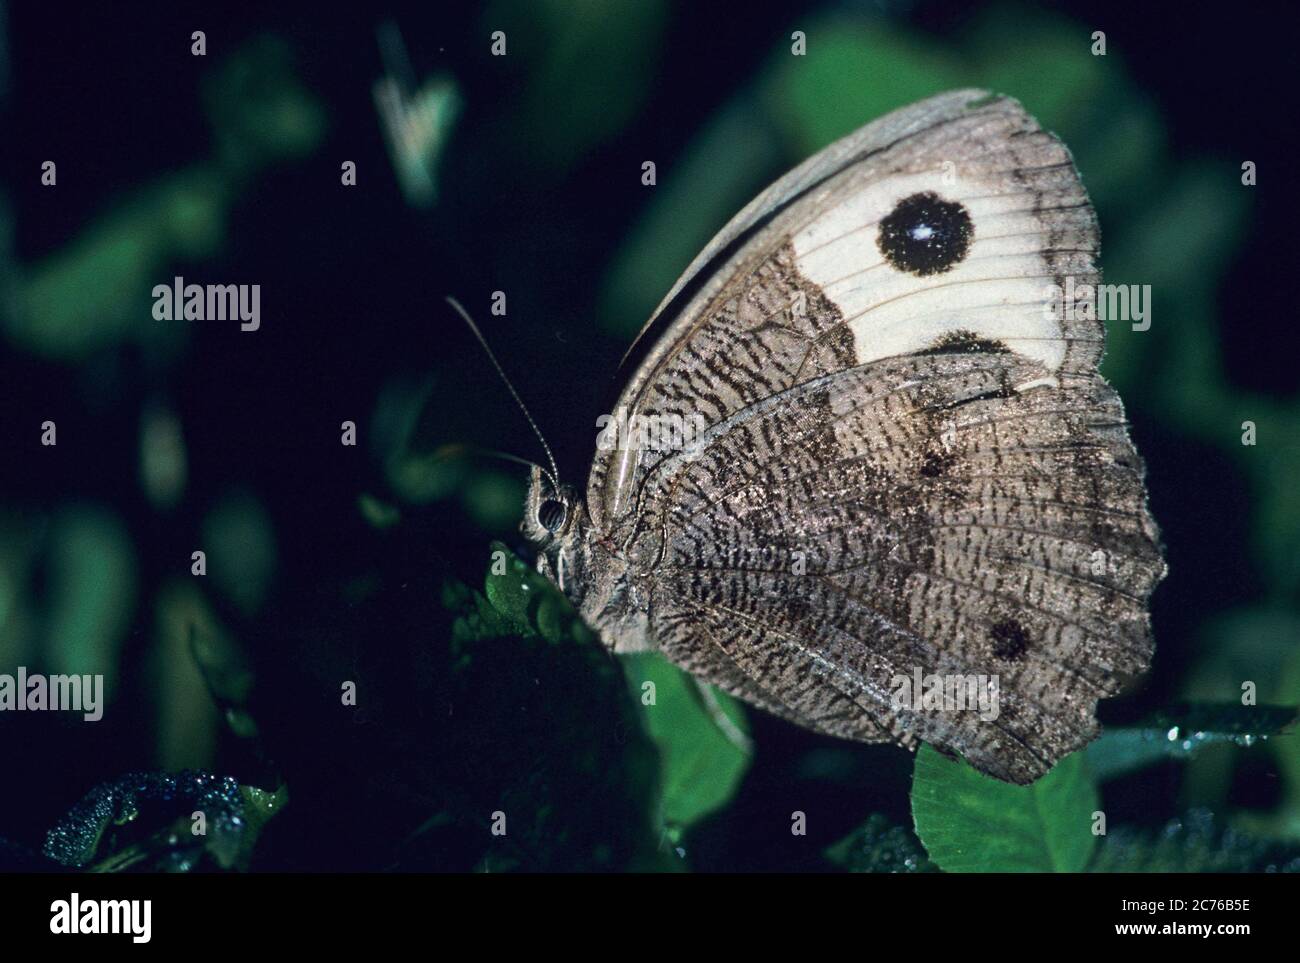 Wood nymph butterfly Stock Photo